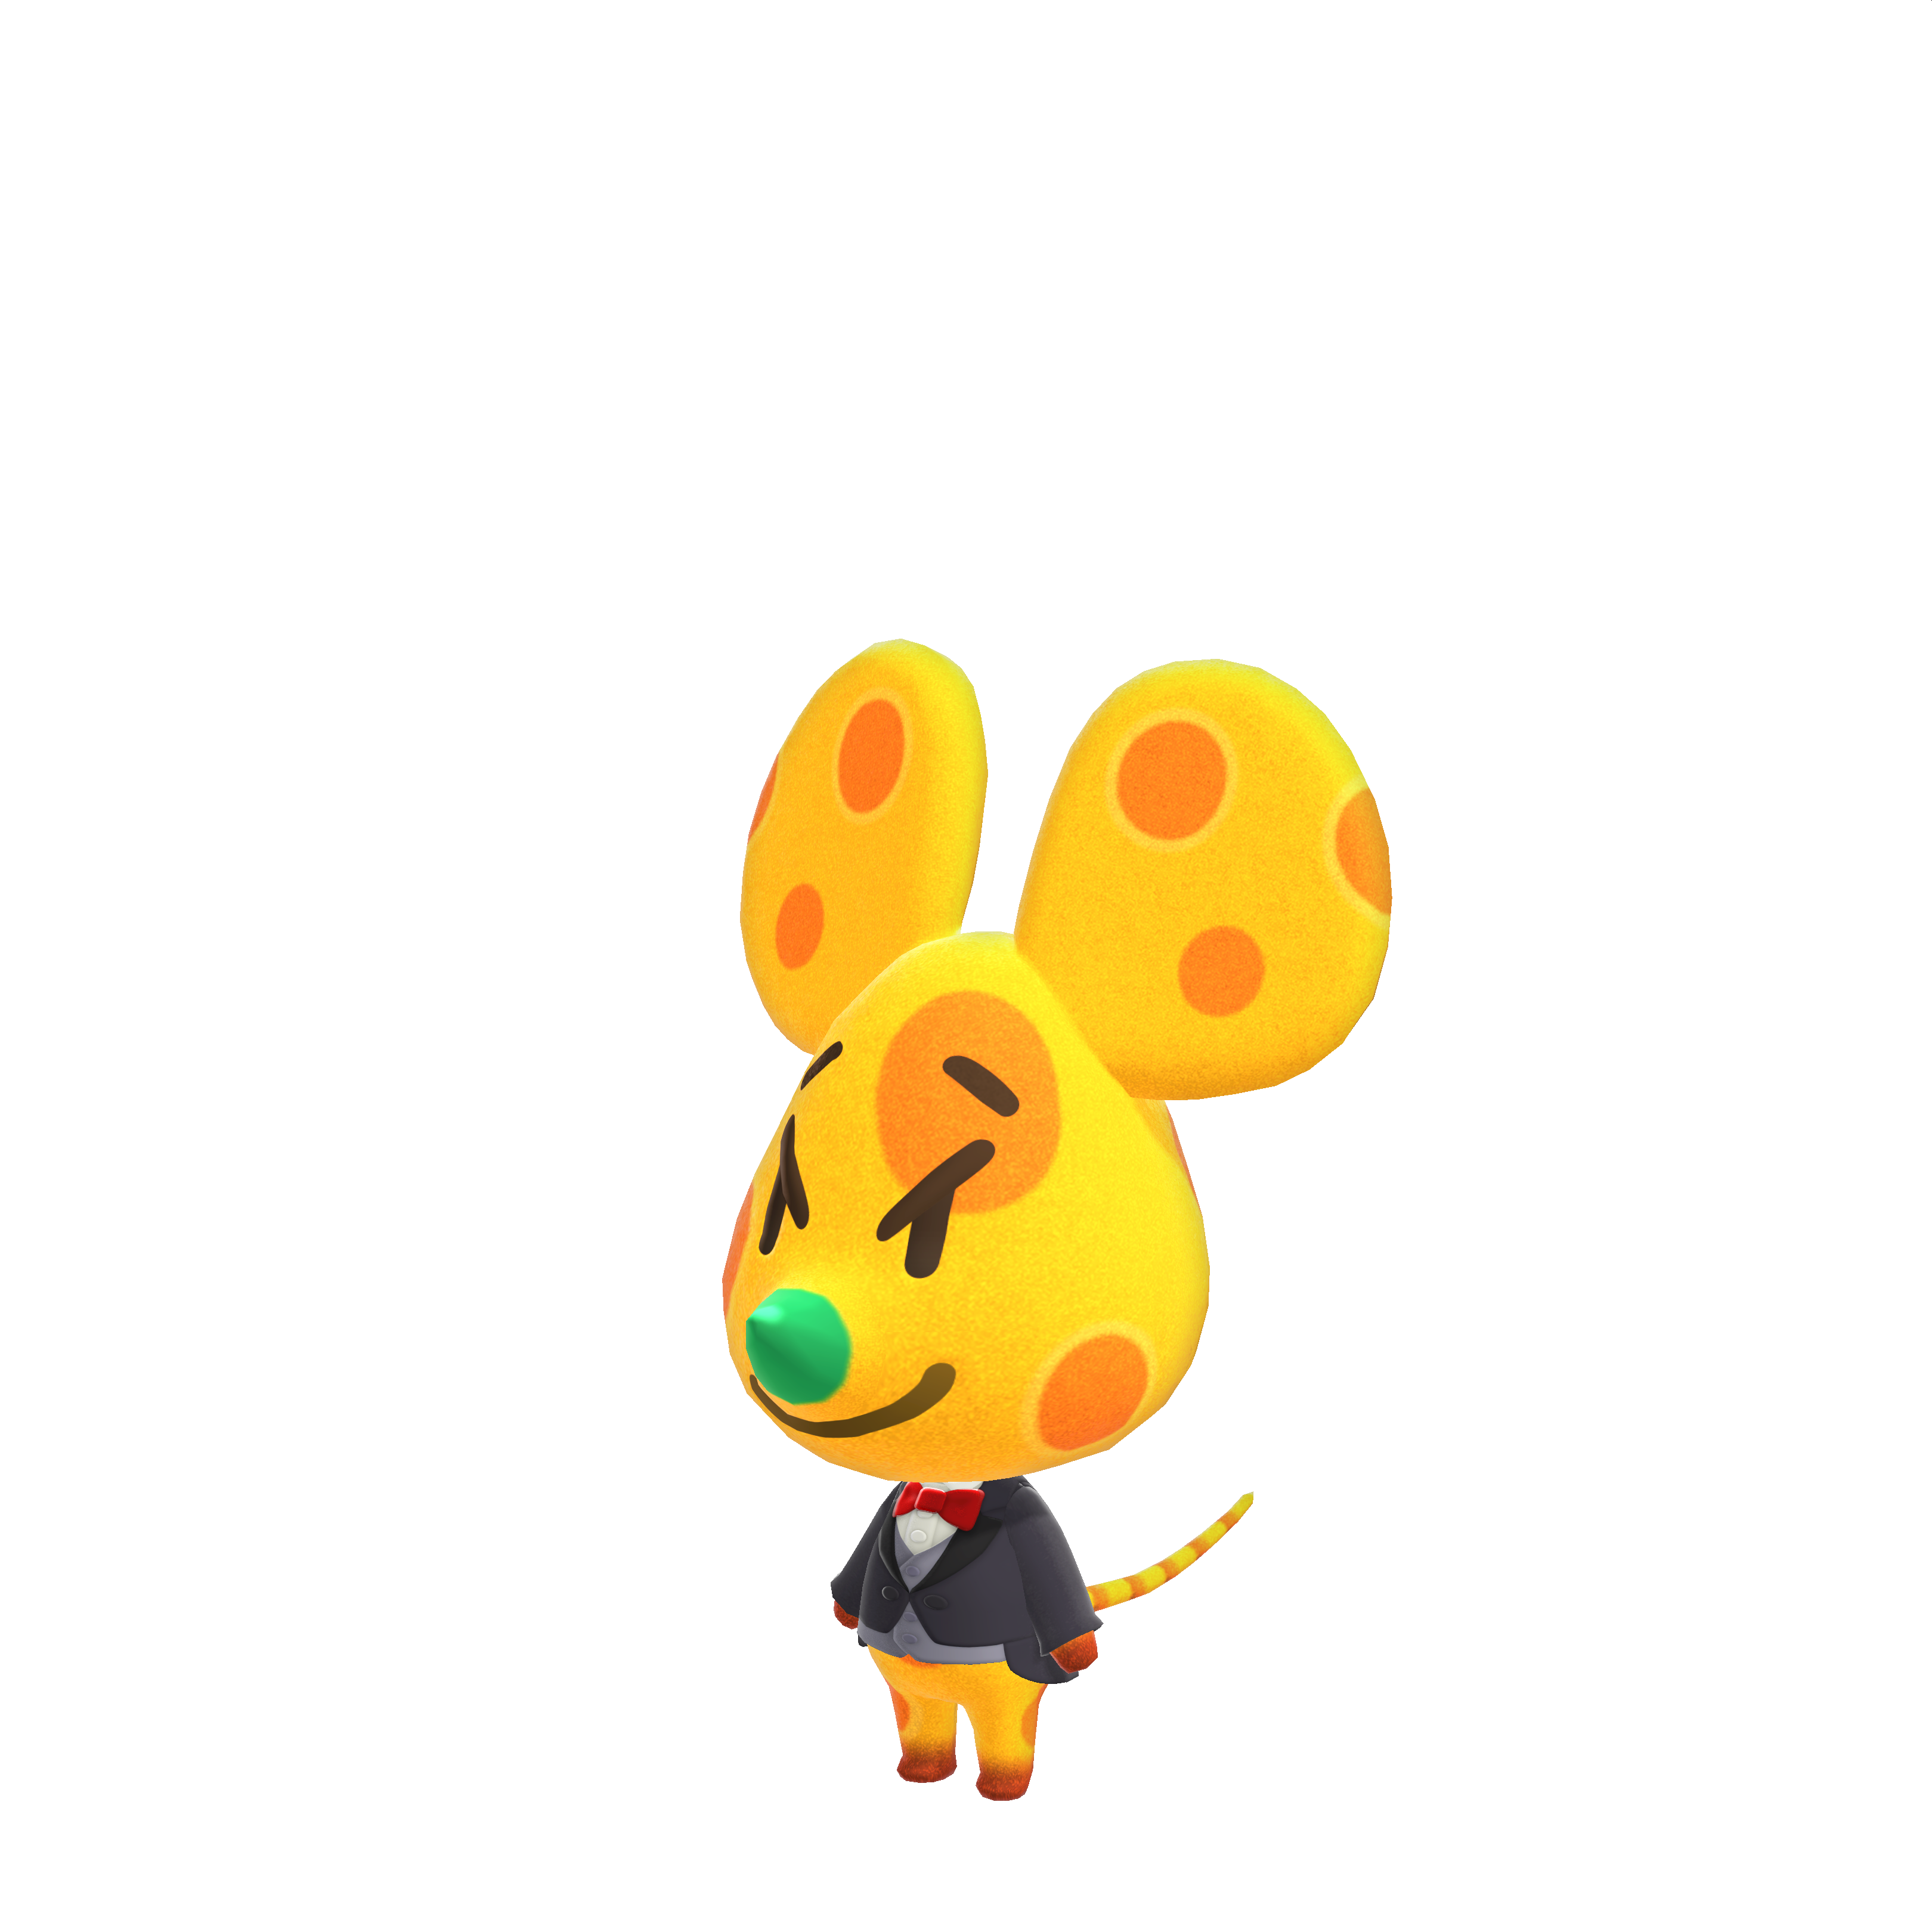 250 High Resolution Animal Crossing: New Horizons Villager & Special